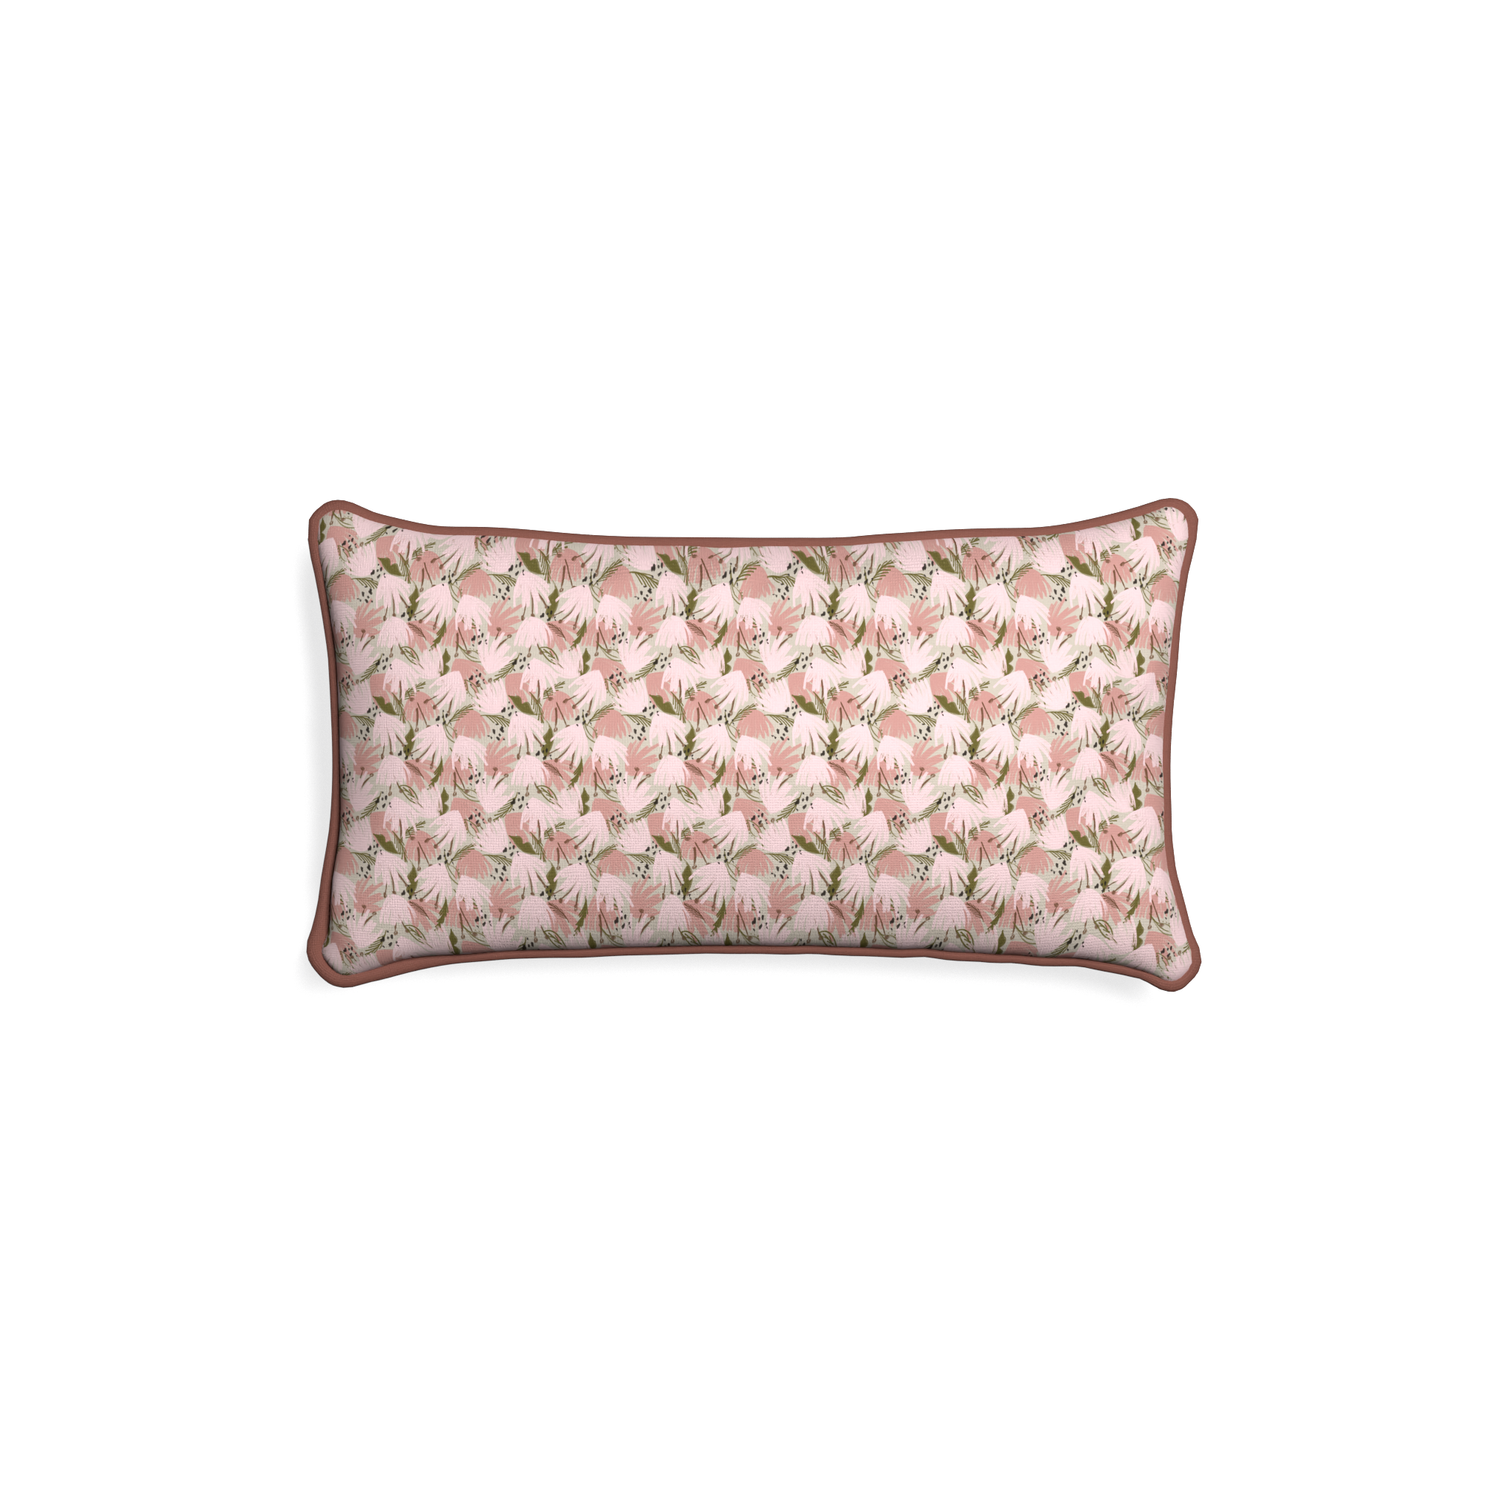 Petite-lumbar eden pink custom pink floralpillow with w piping on white background